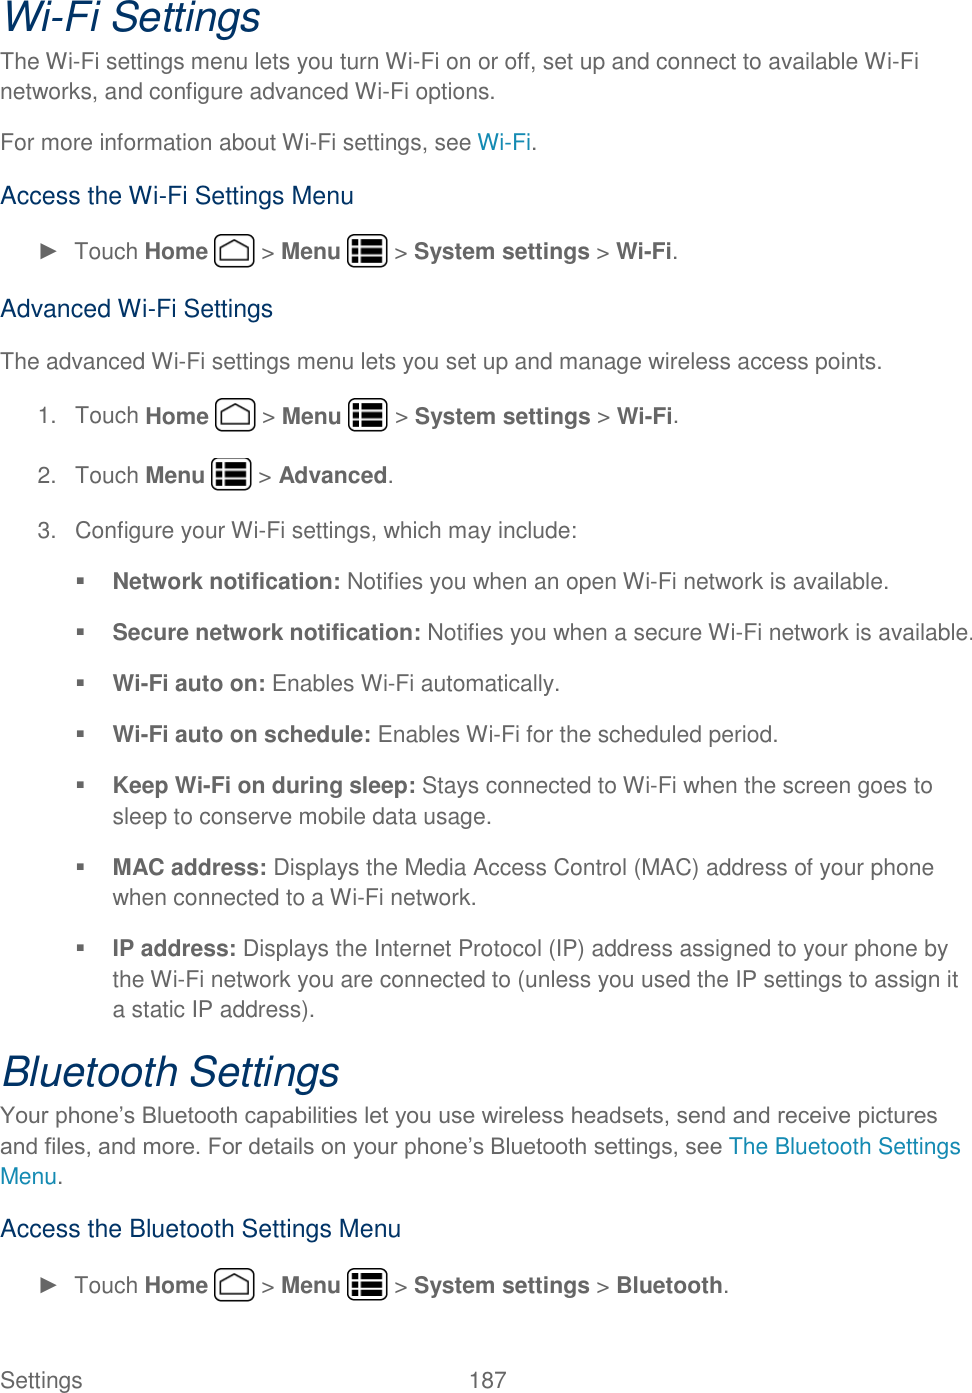 Settings    187 Wi-Fi Settings The Wi-Fi settings menu lets you turn Wi-Fi on or off, set up and connect to available Wi-Fi networks, and configure advanced Wi-Fi options. For more information about Wi-Fi settings, see Wi-Fi. Access the Wi-Fi Settings Menu ►  Touch Home   &gt; Menu   &gt; System settings &gt; Wi-Fi. Advanced Wi-Fi Settings The advanced Wi-Fi settings menu lets you set up and manage wireless access points. 1.  Touch Home   &gt; Menu   &gt; System settings &gt; Wi-Fi. 2.  Touch Menu   &gt; Advanced. 3.  Configure your Wi-Fi settings, which may include:  Network notification: Notifies you when an open Wi-Fi network is available.  Secure network notification: Notifies you when a secure Wi-Fi network is available.  Wi-Fi auto on: Enables Wi-Fi automatically.  Wi-Fi auto on schedule: Enables Wi-Fi for the scheduled period.  Keep Wi-Fi on during sleep: Stays connected to Wi-Fi when the screen goes to sleep to conserve mobile data usage.  MAC address: Displays the Media Access Control (MAC) address of your phone when connected to a Wi-Fi network.  IP address: Displays the Internet Protocol (IP) address assigned to your phone by the Wi-Fi network you are connected to (unless you used the IP settings to assign it a static IP address). Bluetooth Settings Your phone’s Bluetooth capabilities let you use wireless headsets, send and receive pictures and files, and more. For details on your phone’s Bluetooth settings, see The Bluetooth Settings Menu.  Access the Bluetooth Settings Menu ►  Touch Home   &gt; Menu   &gt; System settings &gt; Bluetooth. 